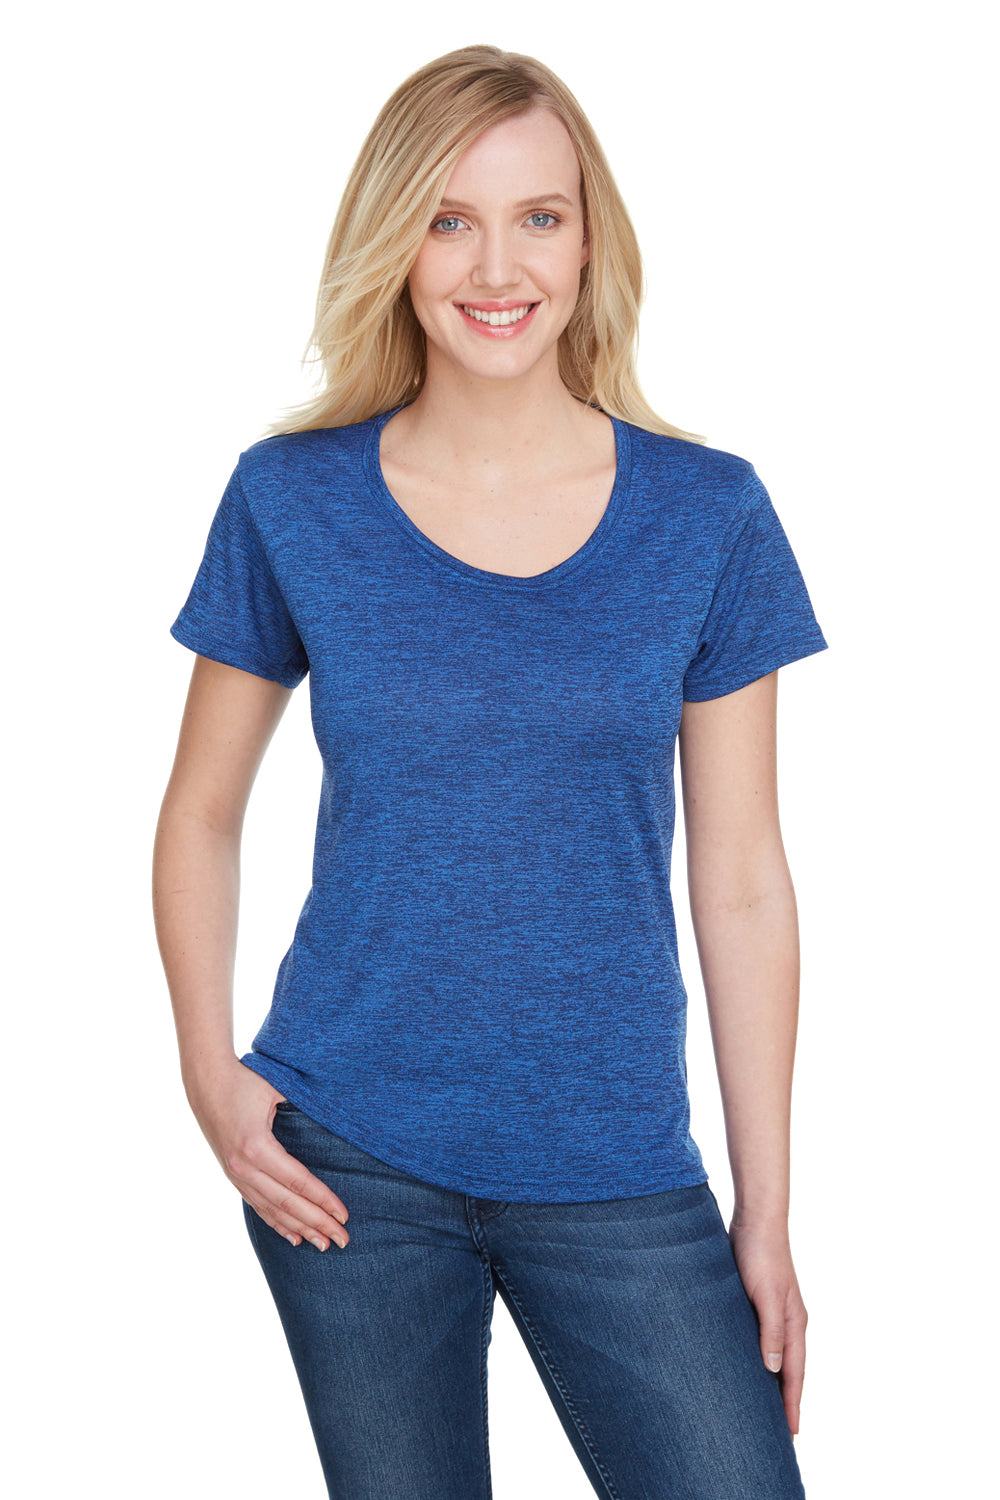 A4 NW3010 Womens Tonal Space Dye Short Sleeve Scoop Neck T-Shirt Royal Blue Front